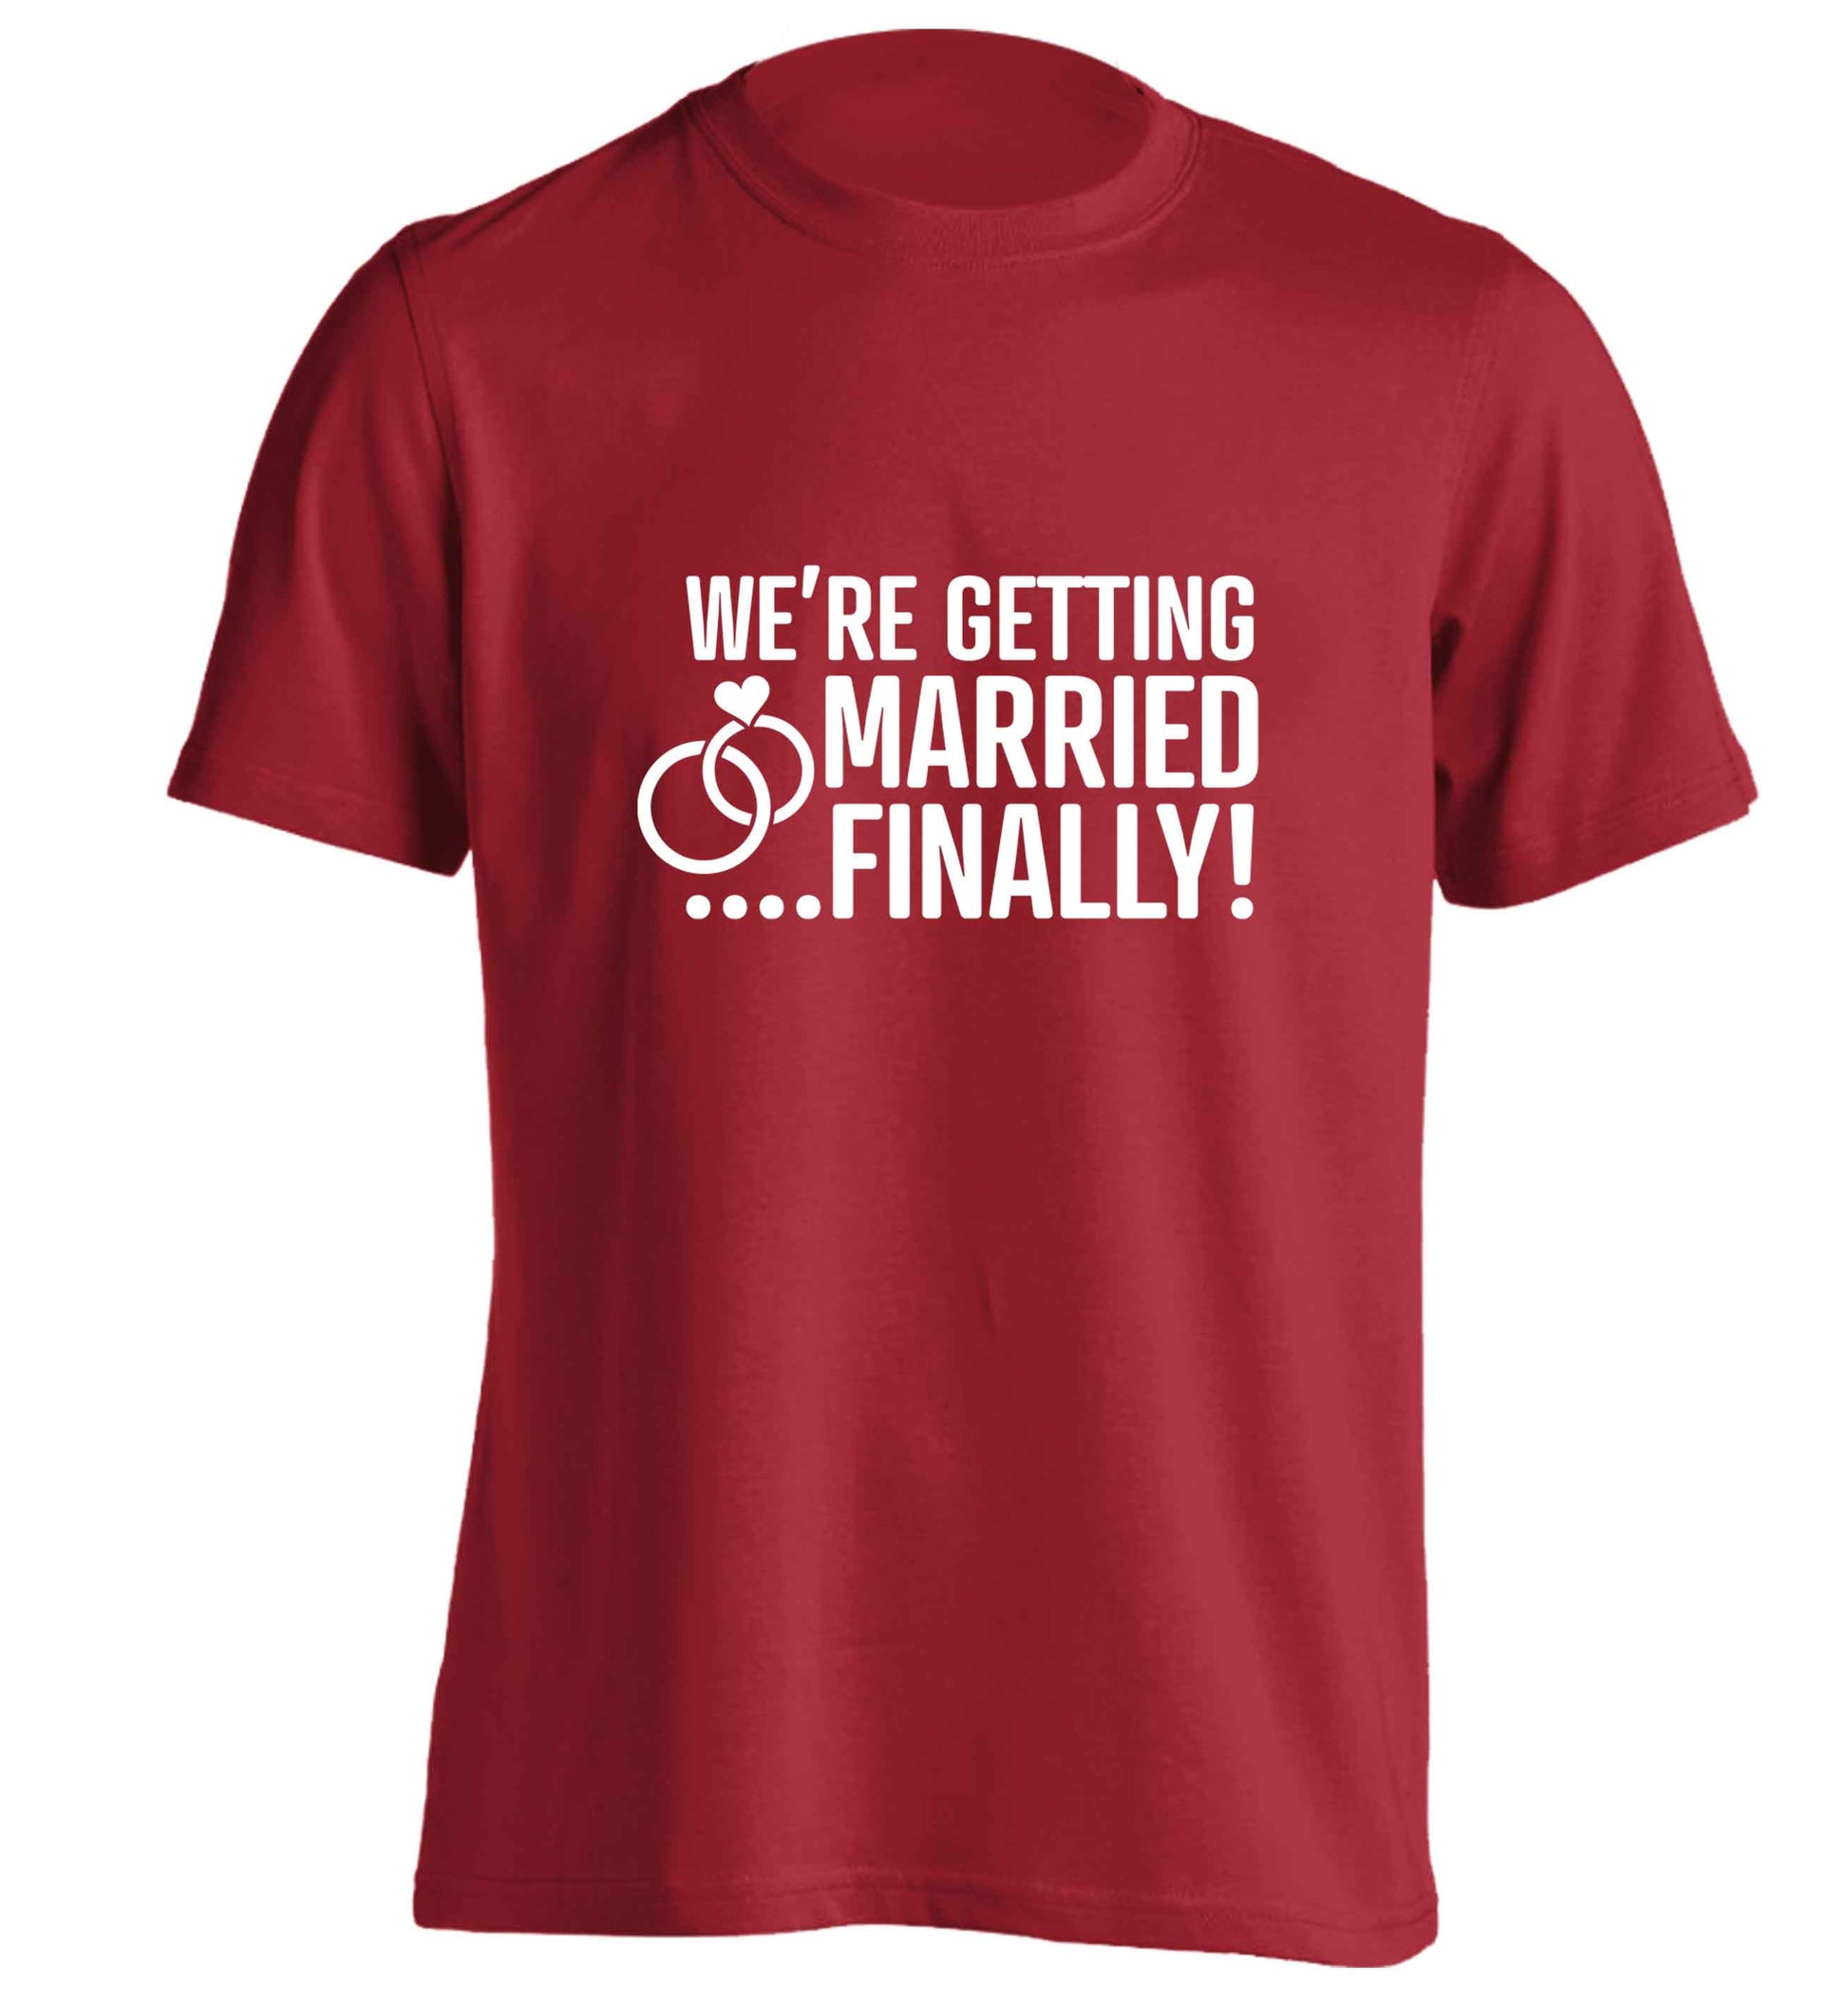 It's been a long wait but it's finally happening! Let everyone know you're celebrating your big day soon! adults unisex red Tshirt 2XL